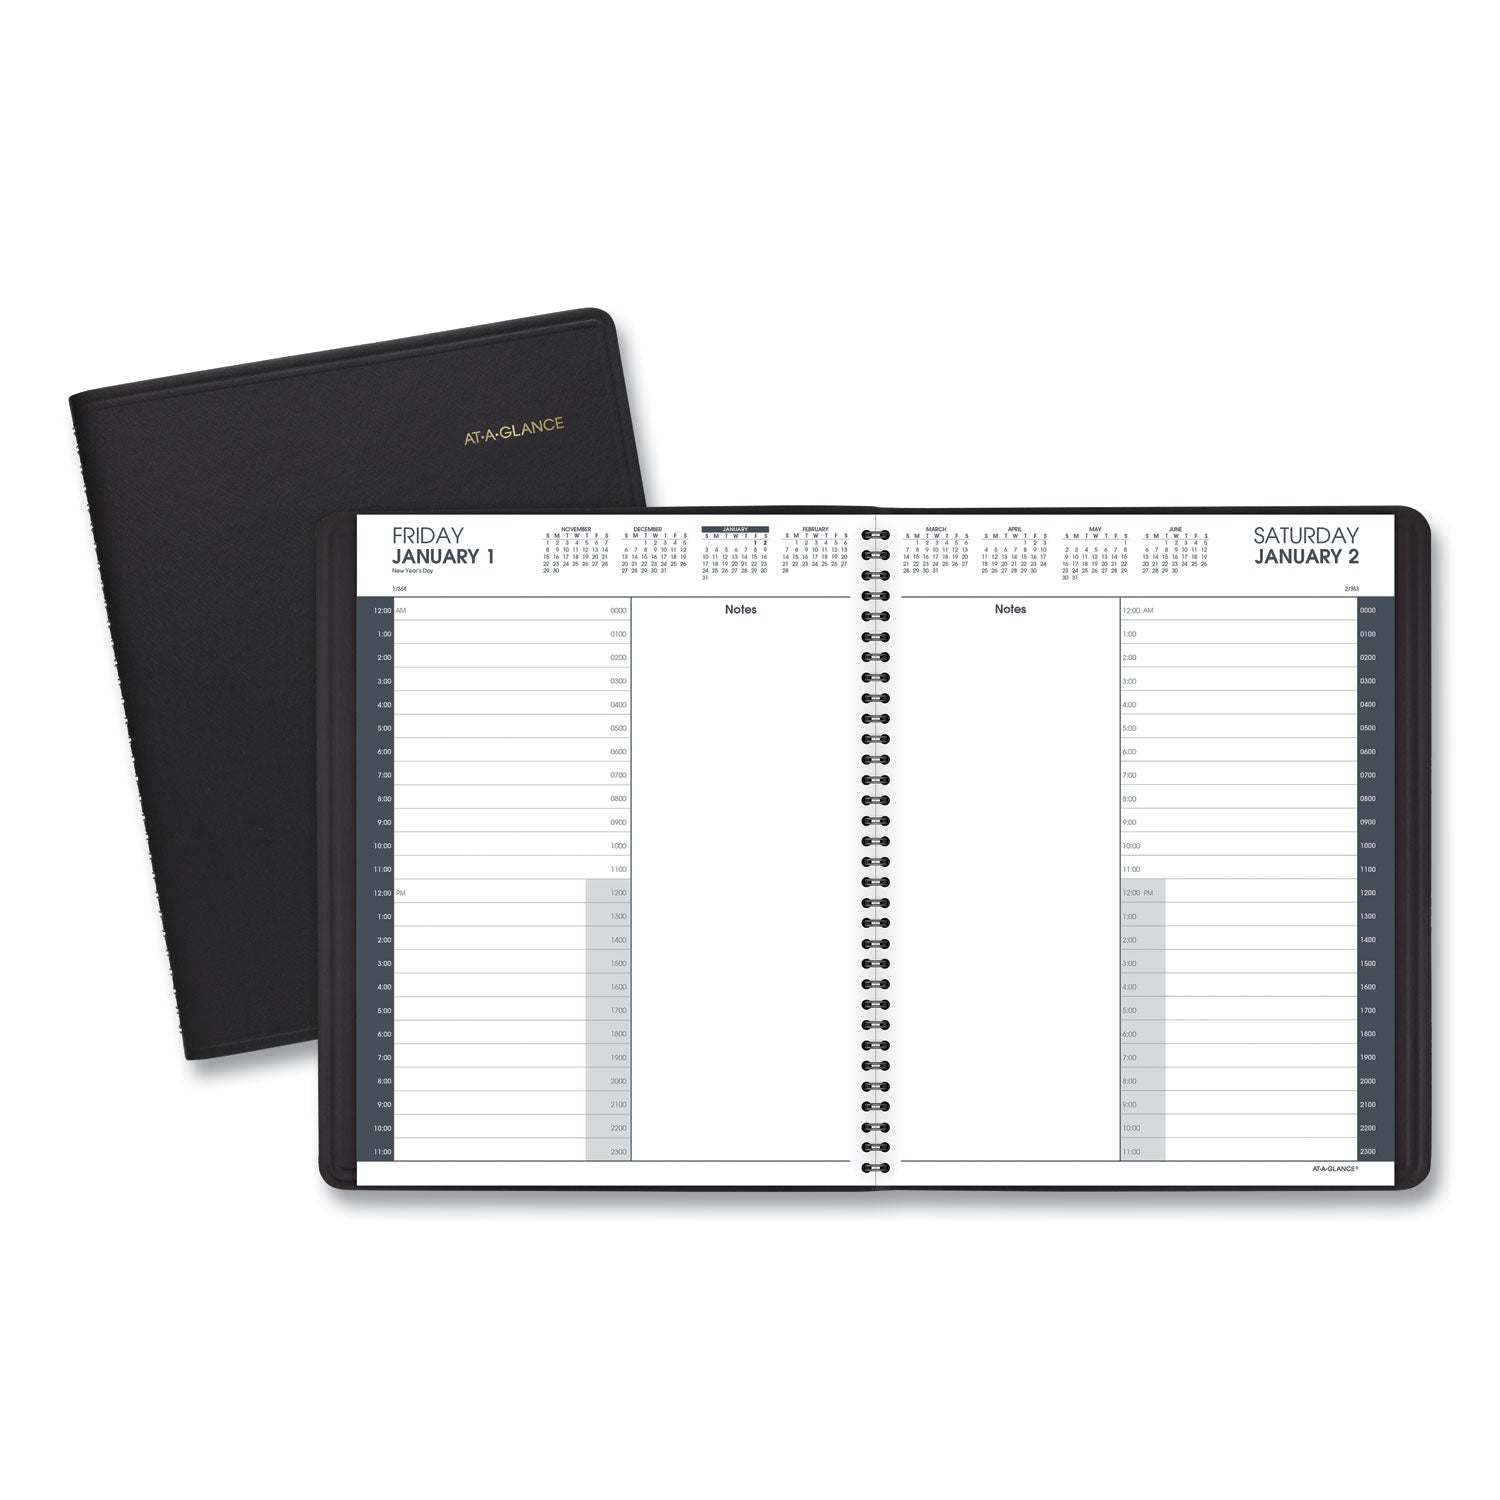 At-A-Glance 24-HourAppointment Book Planner - Daily - January 2024 - December 2024 - 12:00 AM to 11:00 PM - Hourly - 1 Day Single Page Layout - 8 1/2" x 11" Sheet Size - Wire Bound - Simulated Leather - Black CoverNotepad - 1 Each - 1